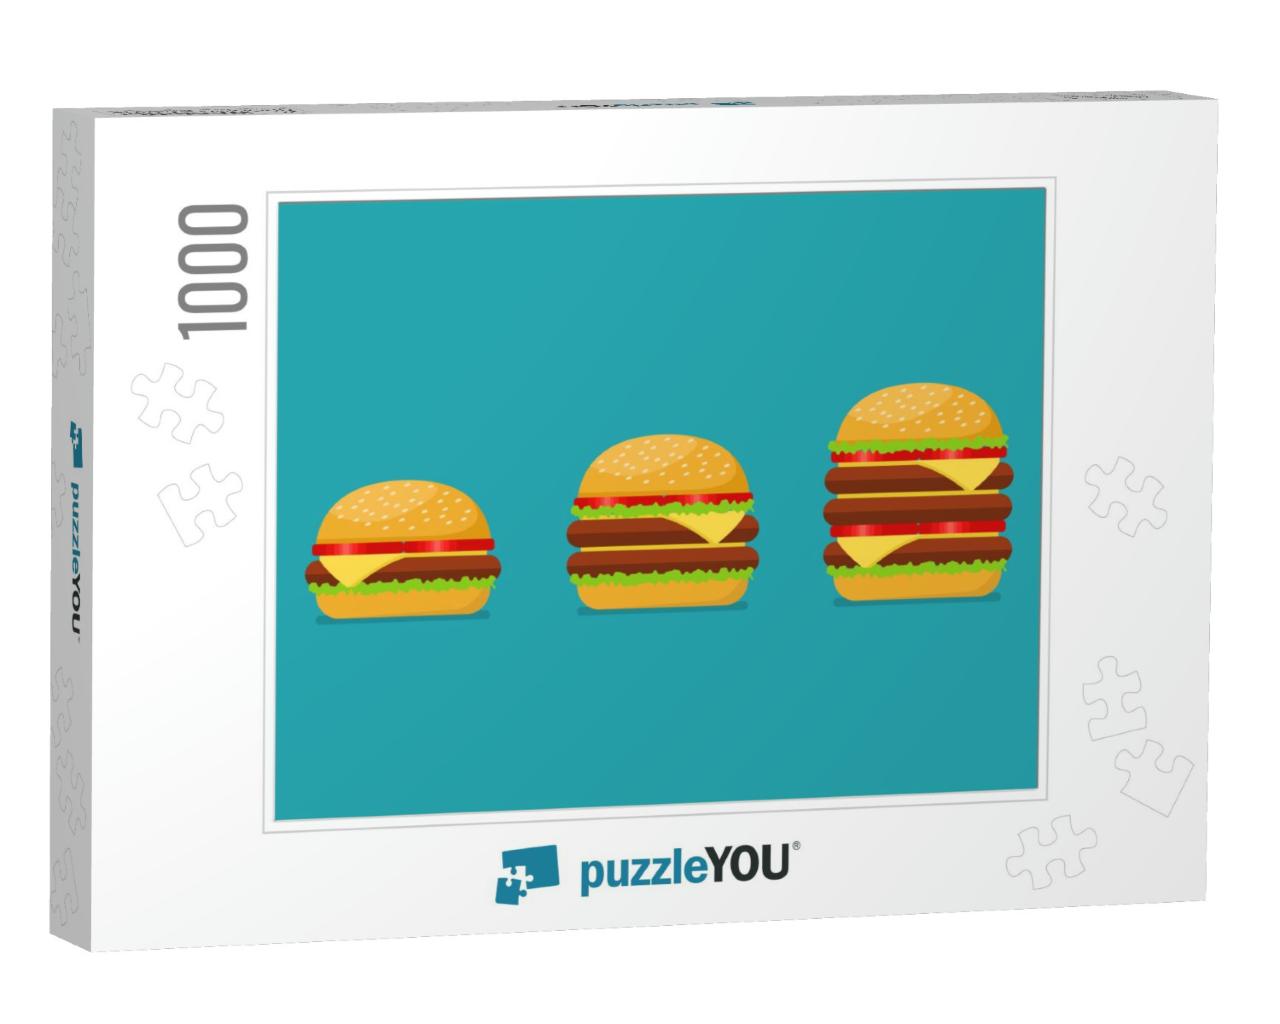 Three Hamburgers Set. from Simple Hamburger to Double & T... Jigsaw Puzzle with 1000 pieces